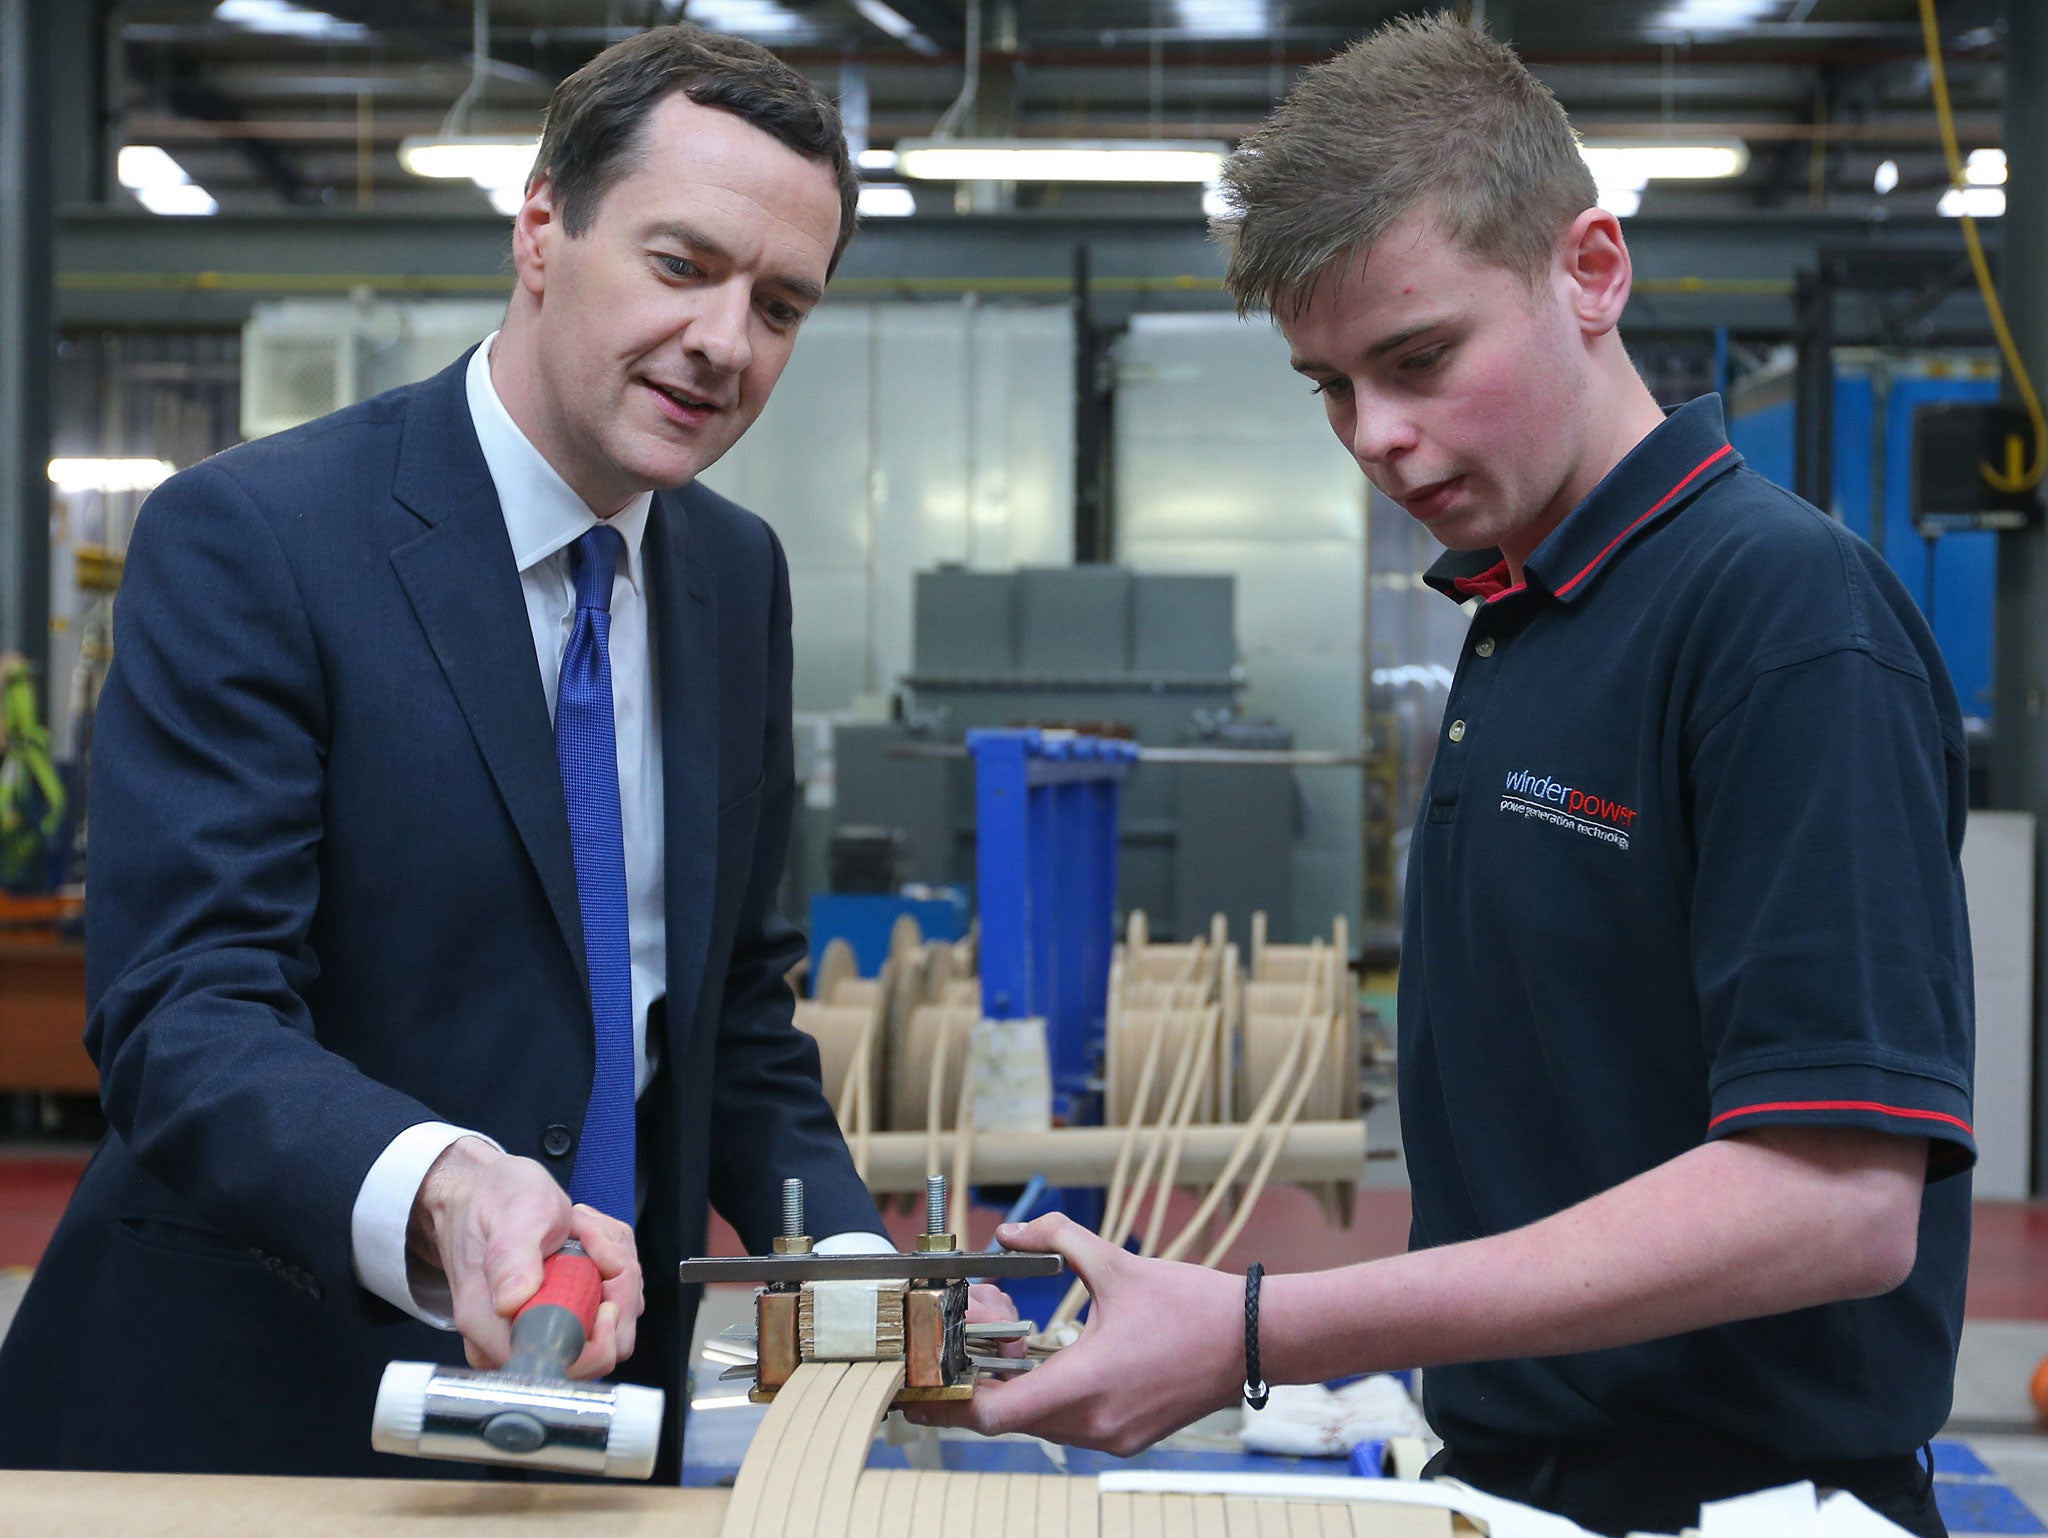 The Chancellor, George Osborne, meets apprentice Jordan Hankin during a visit to Winder Power in May, 2015